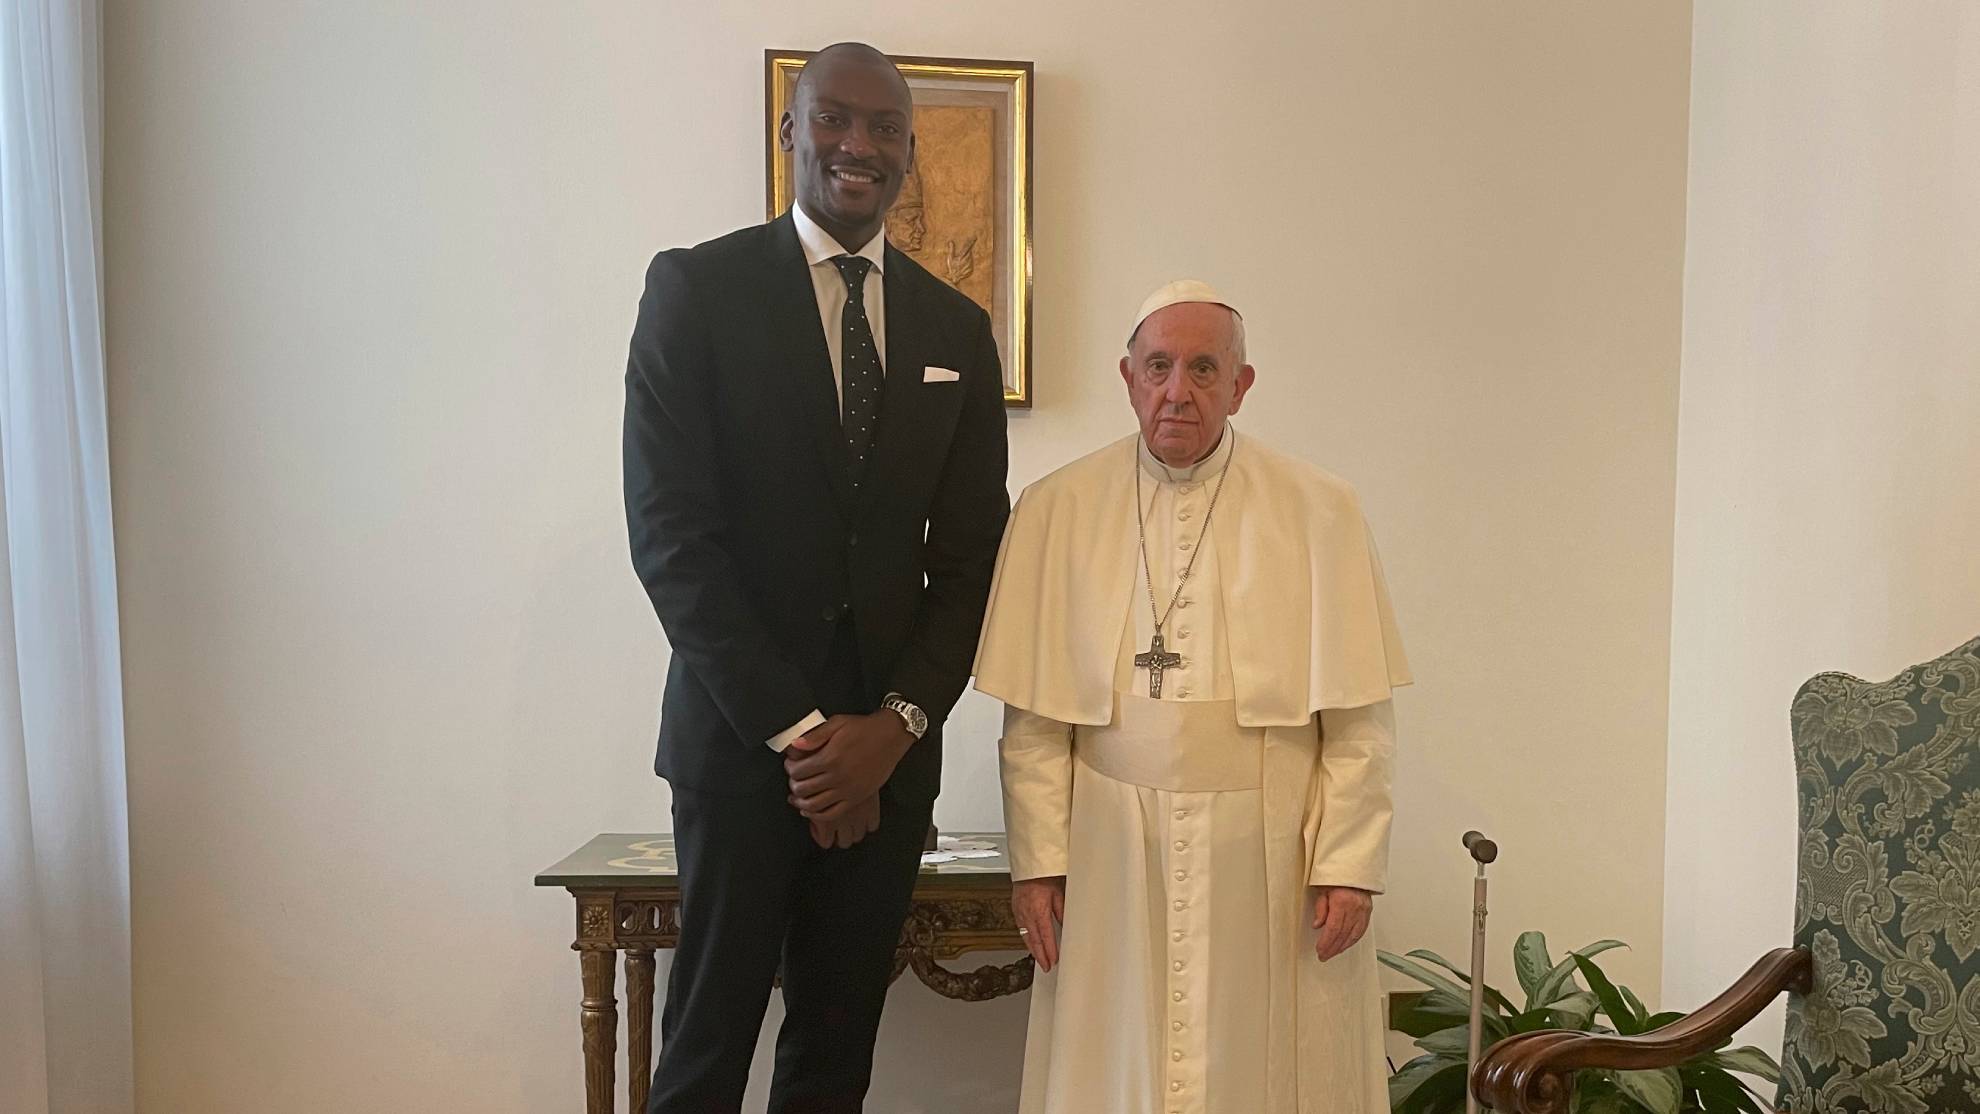 NBA's Biyombo brings Congo to the Pope Francis after trip canceled